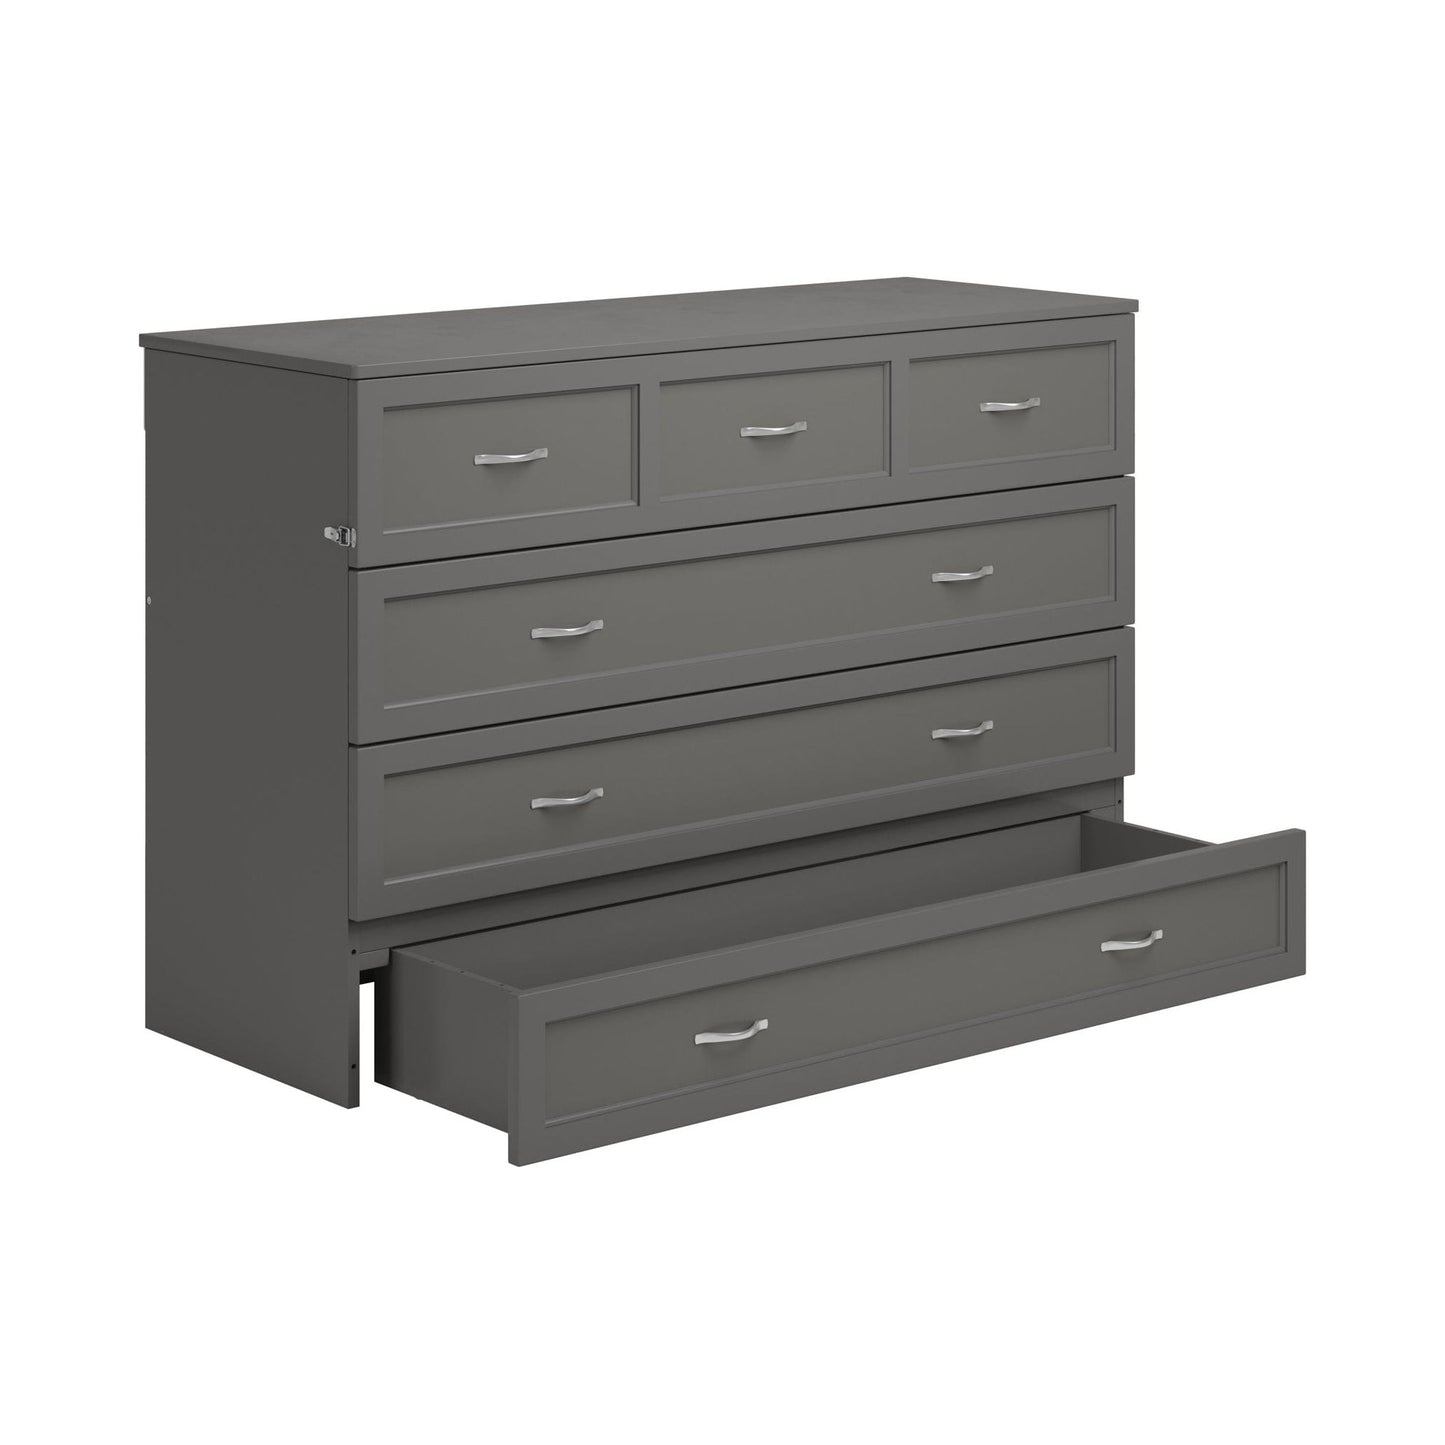 AFI Furnishings Northfield Queen Murphy Bed Chest Grey AC574149